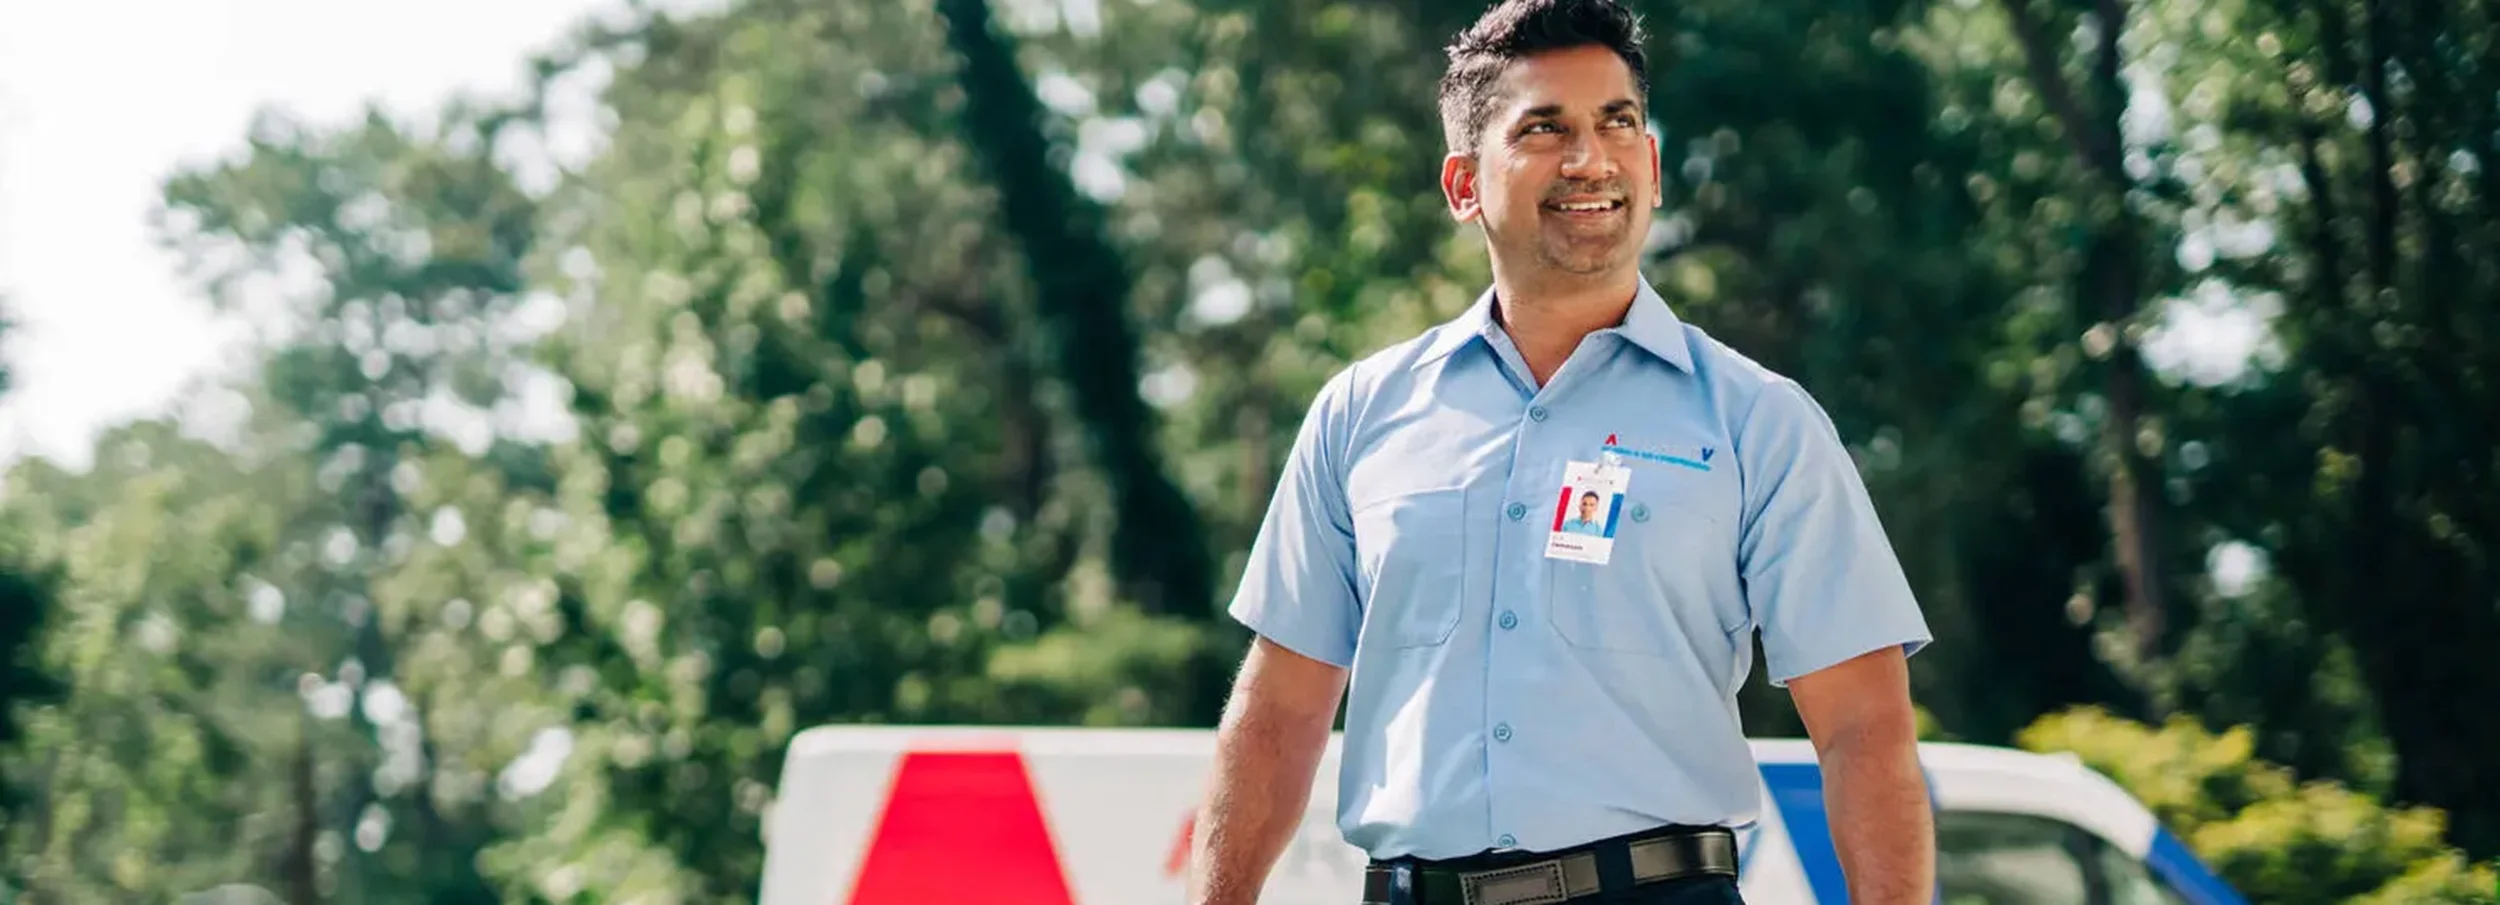 Male South Asian Aire Serv technician in branded blue collared shirt arriving for residential service call.